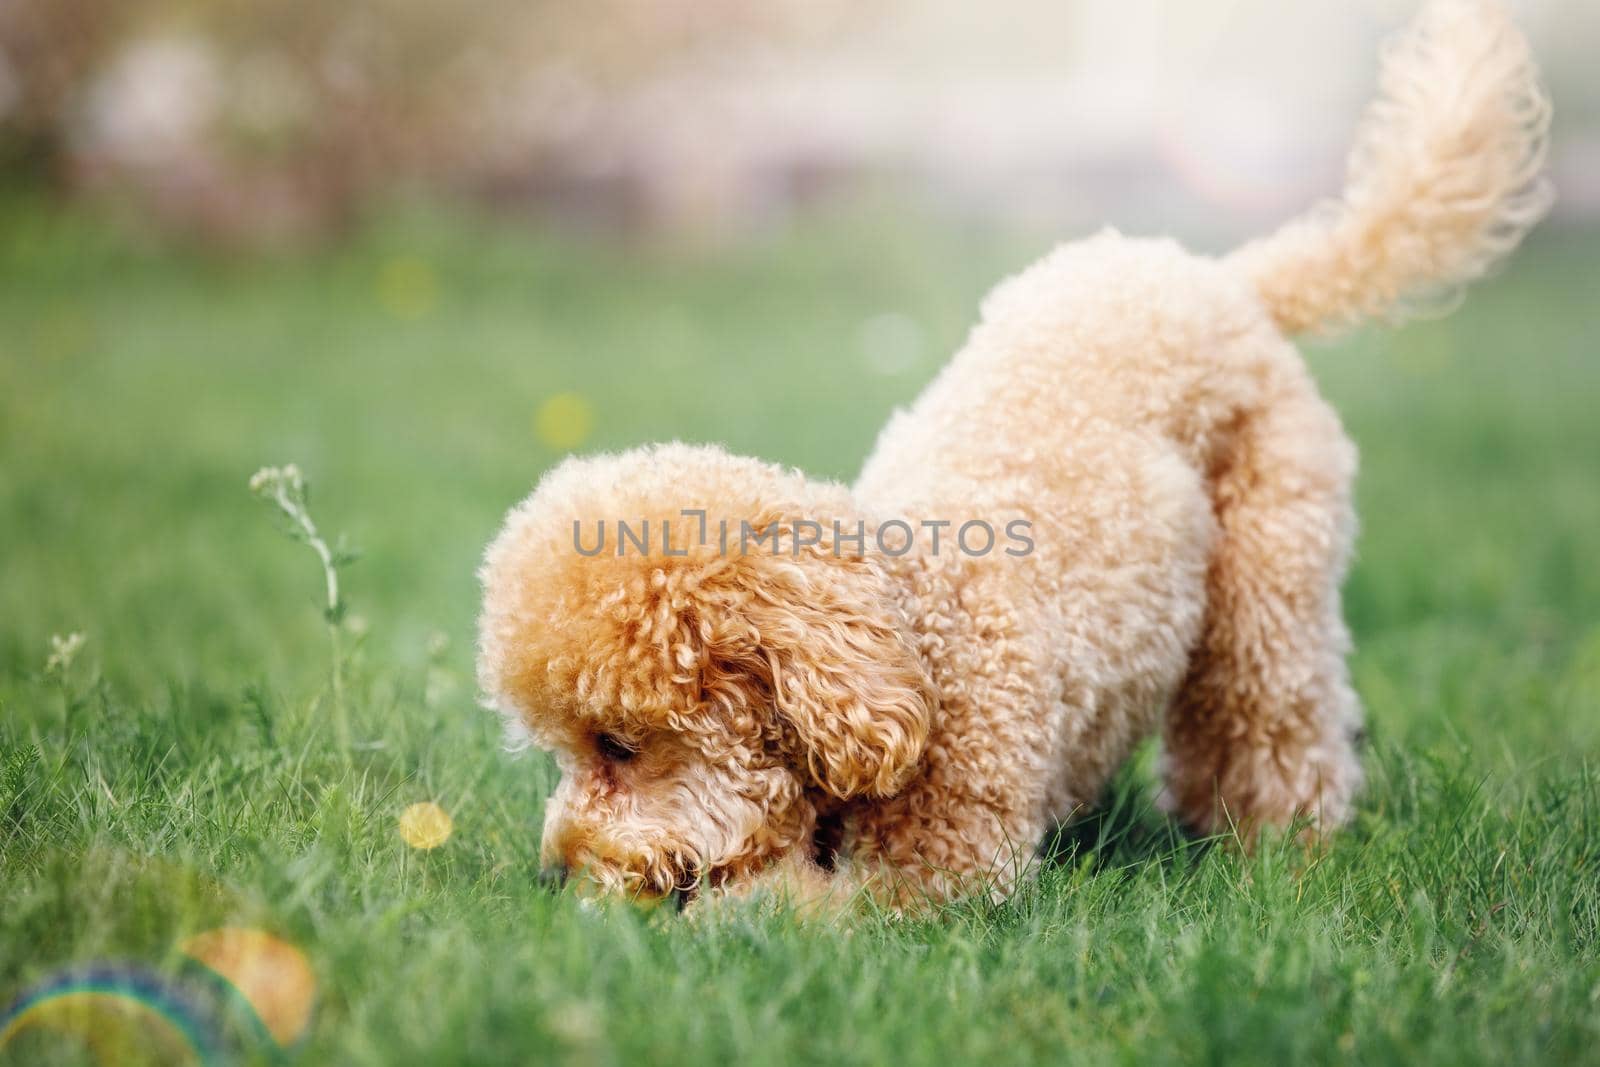 A cute little poodle was playing on the lawn on a sunny day, the dog found something in the grass, he sniff it curiously.